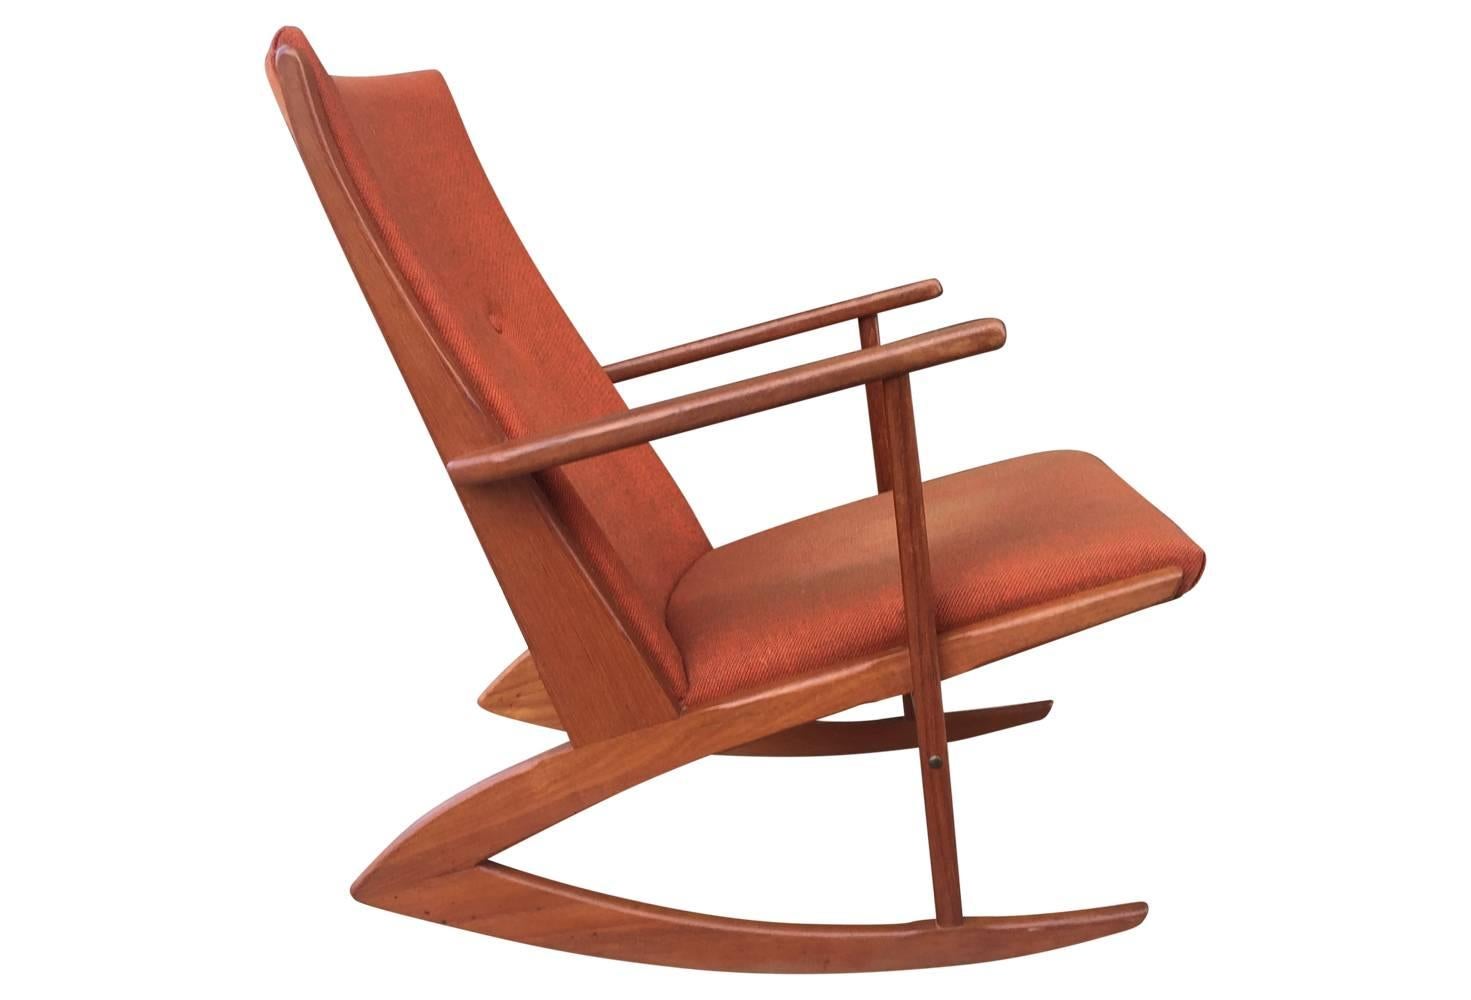 This iconic Mid-Century rocking chair is in great condition with its original orange tweed upholstery. Light fading to seat fabric, but presents beautifully!